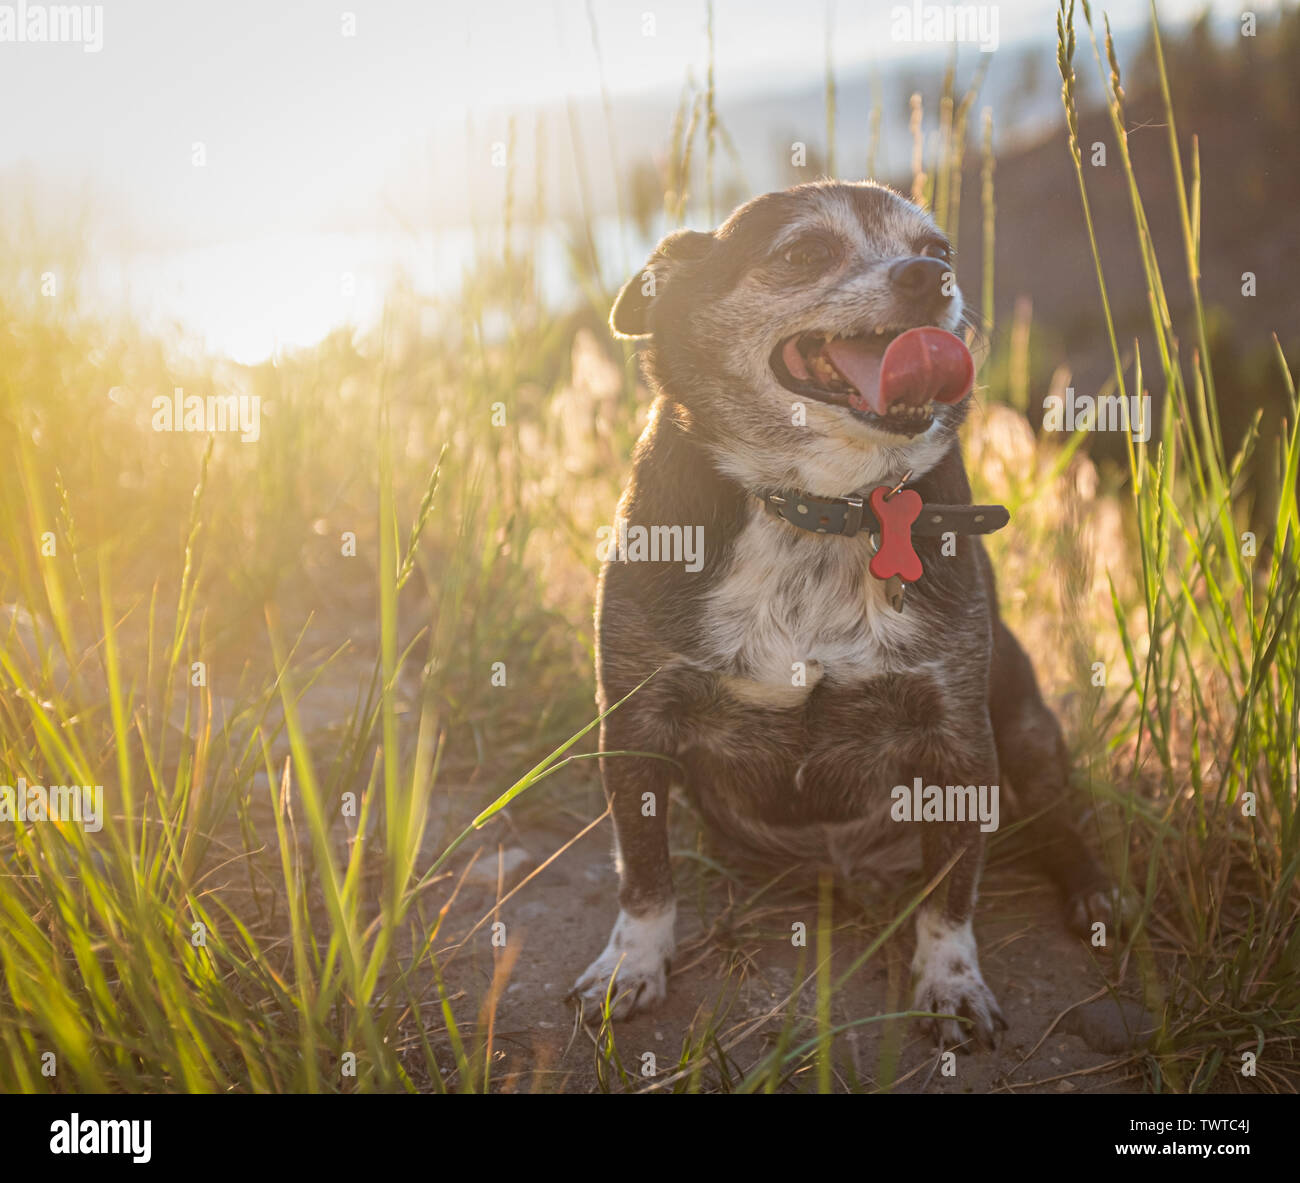 An Old Chubby Chihuahua Dog At Sunset Stock Photo